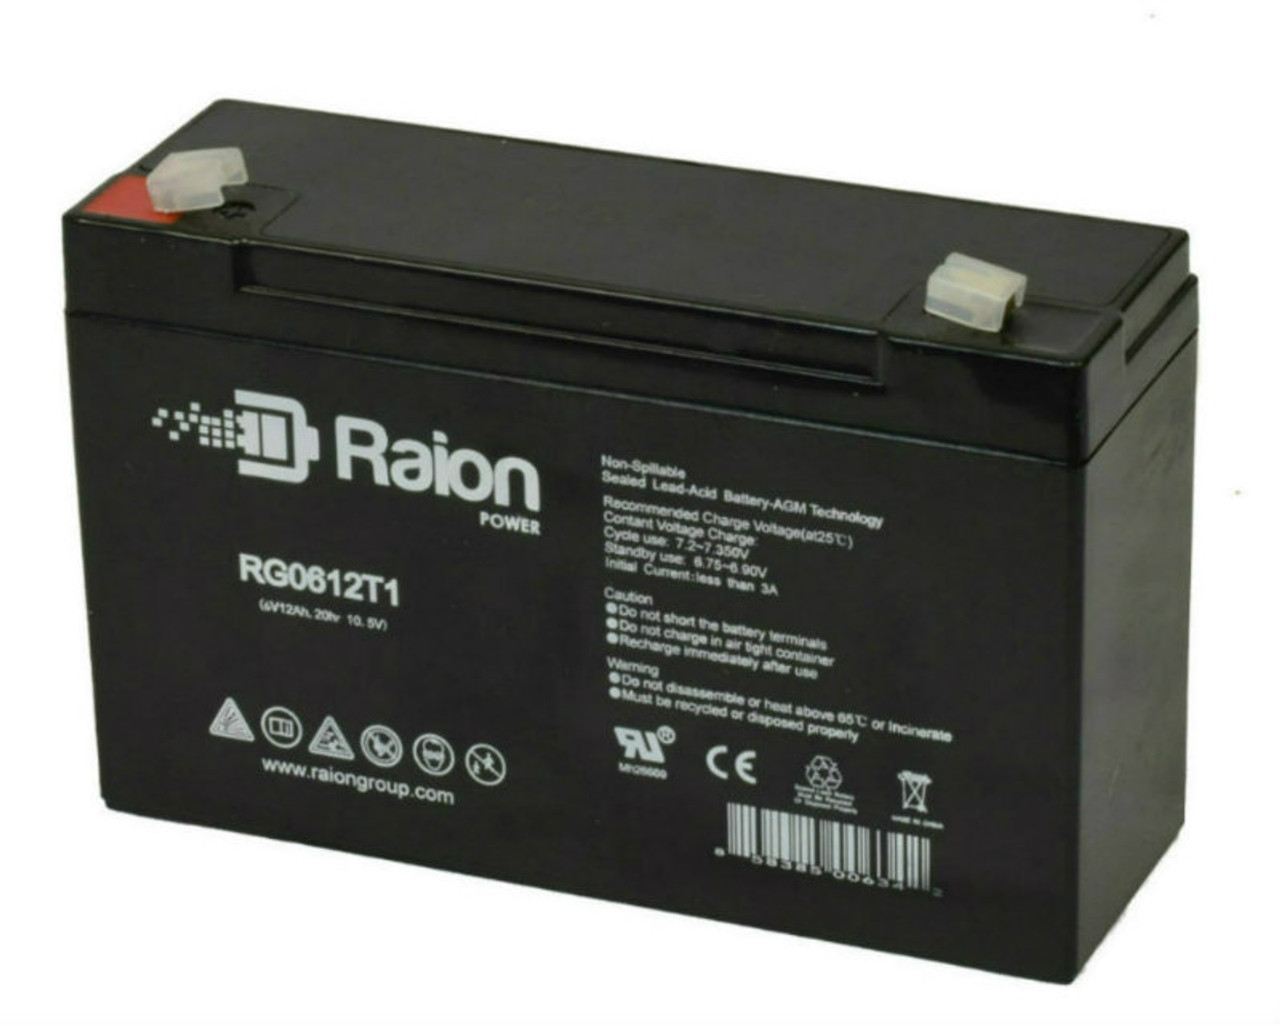 Raion Power RG06120T1 Replacement 6V 12Ah Emergency Light Battery for Sure-Lites 26000304